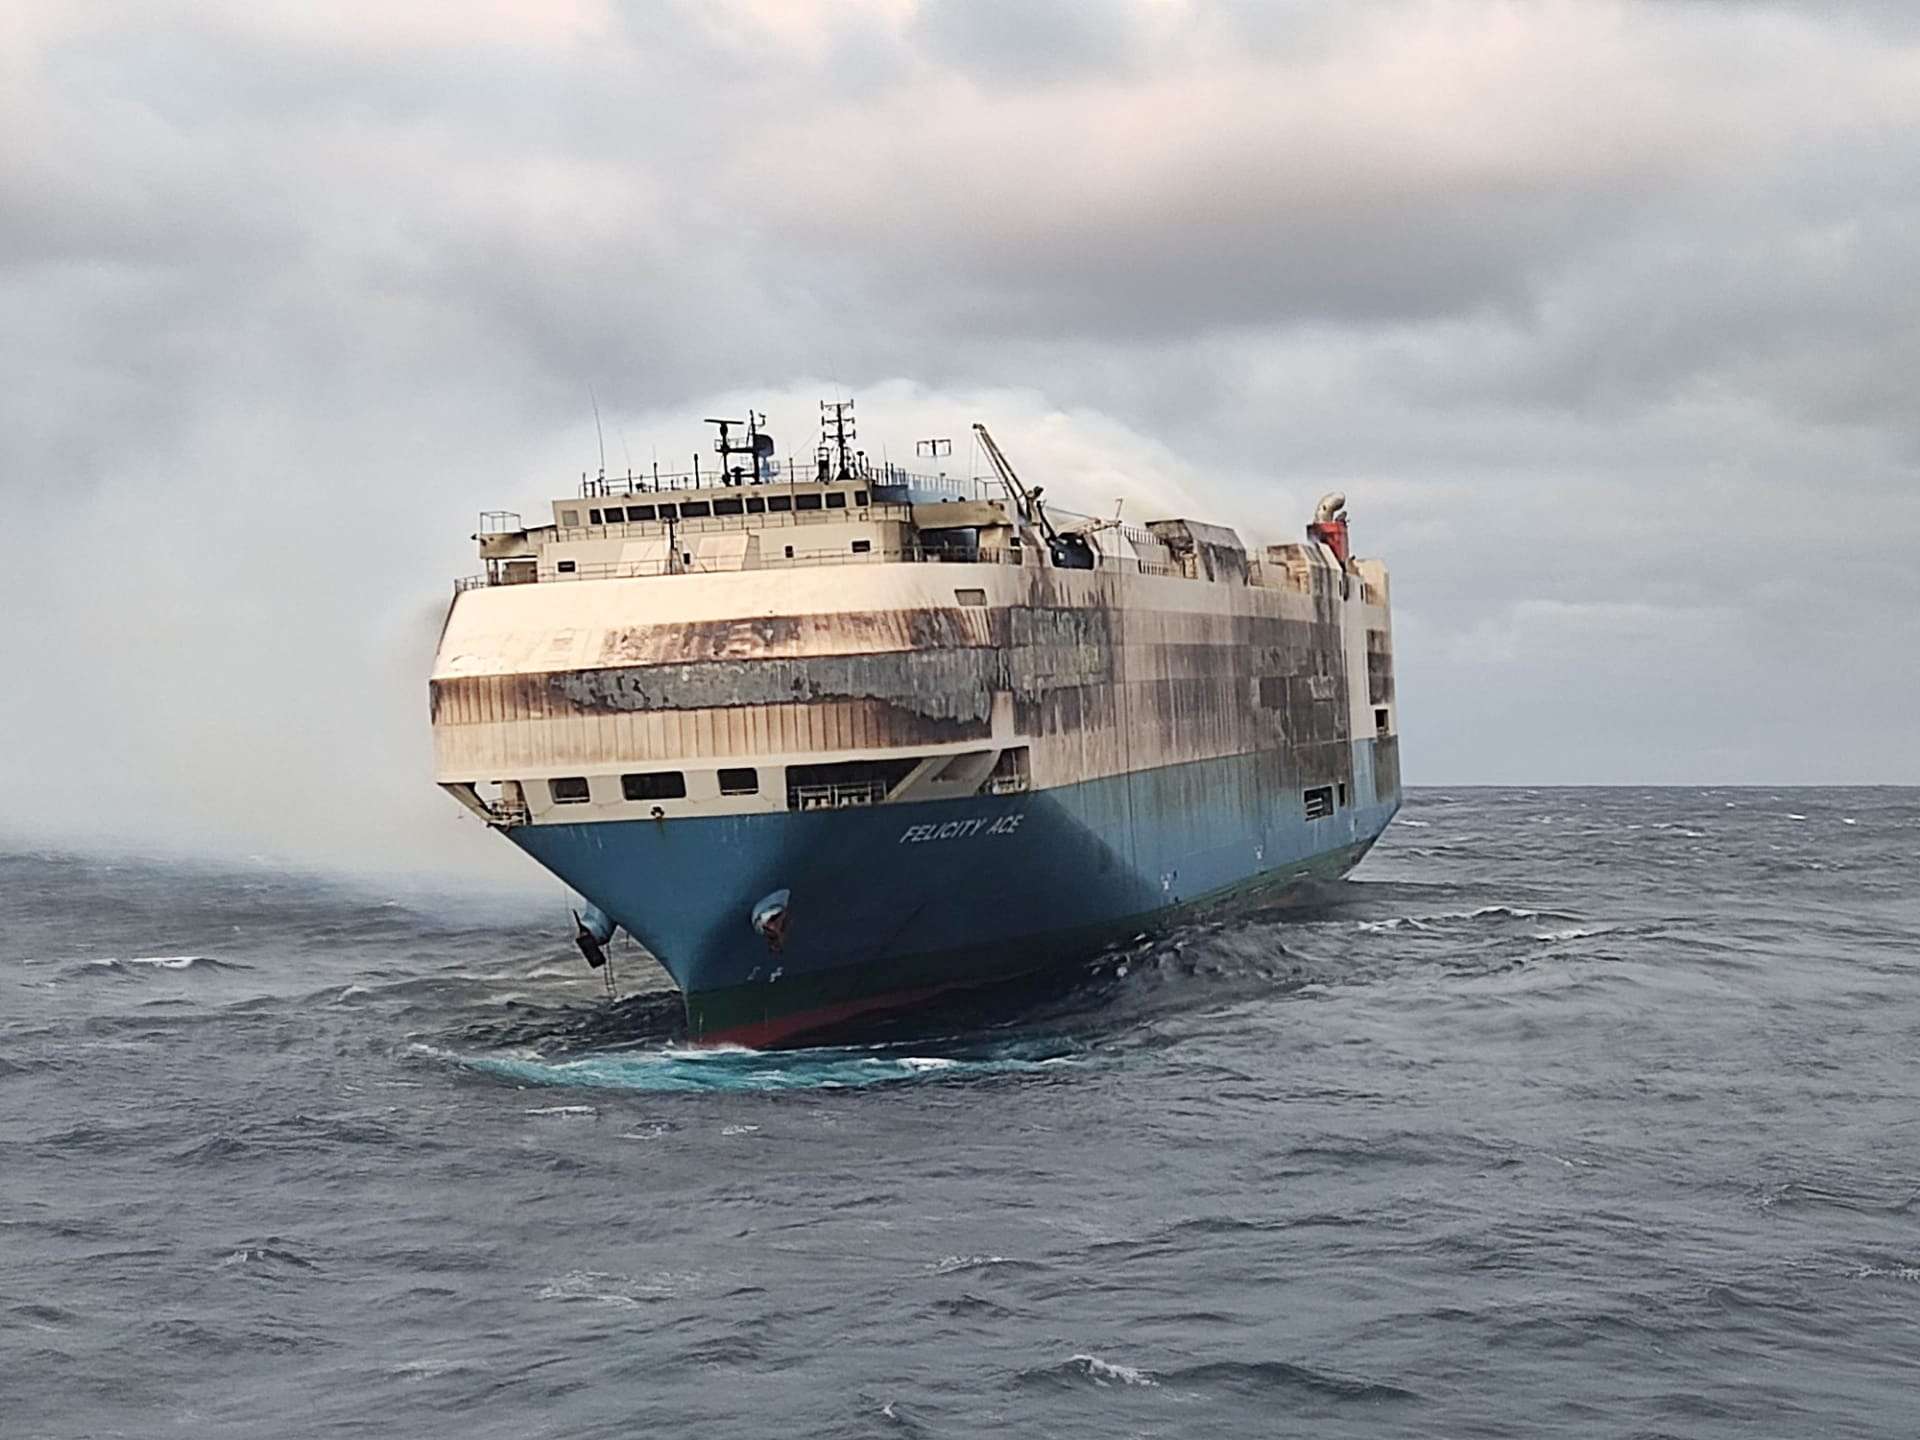 The ship, Felicity Ace, which was traveling from Emden, Germany, where Volkswagen has a factory, to Davisville, in the U.S. state of Rhode Island, burns more than 100 km from the Azores islands, Portugal, February 18, 2022. Portuguese Navy (Marinha Portuguesa)/Handout via REUTERS